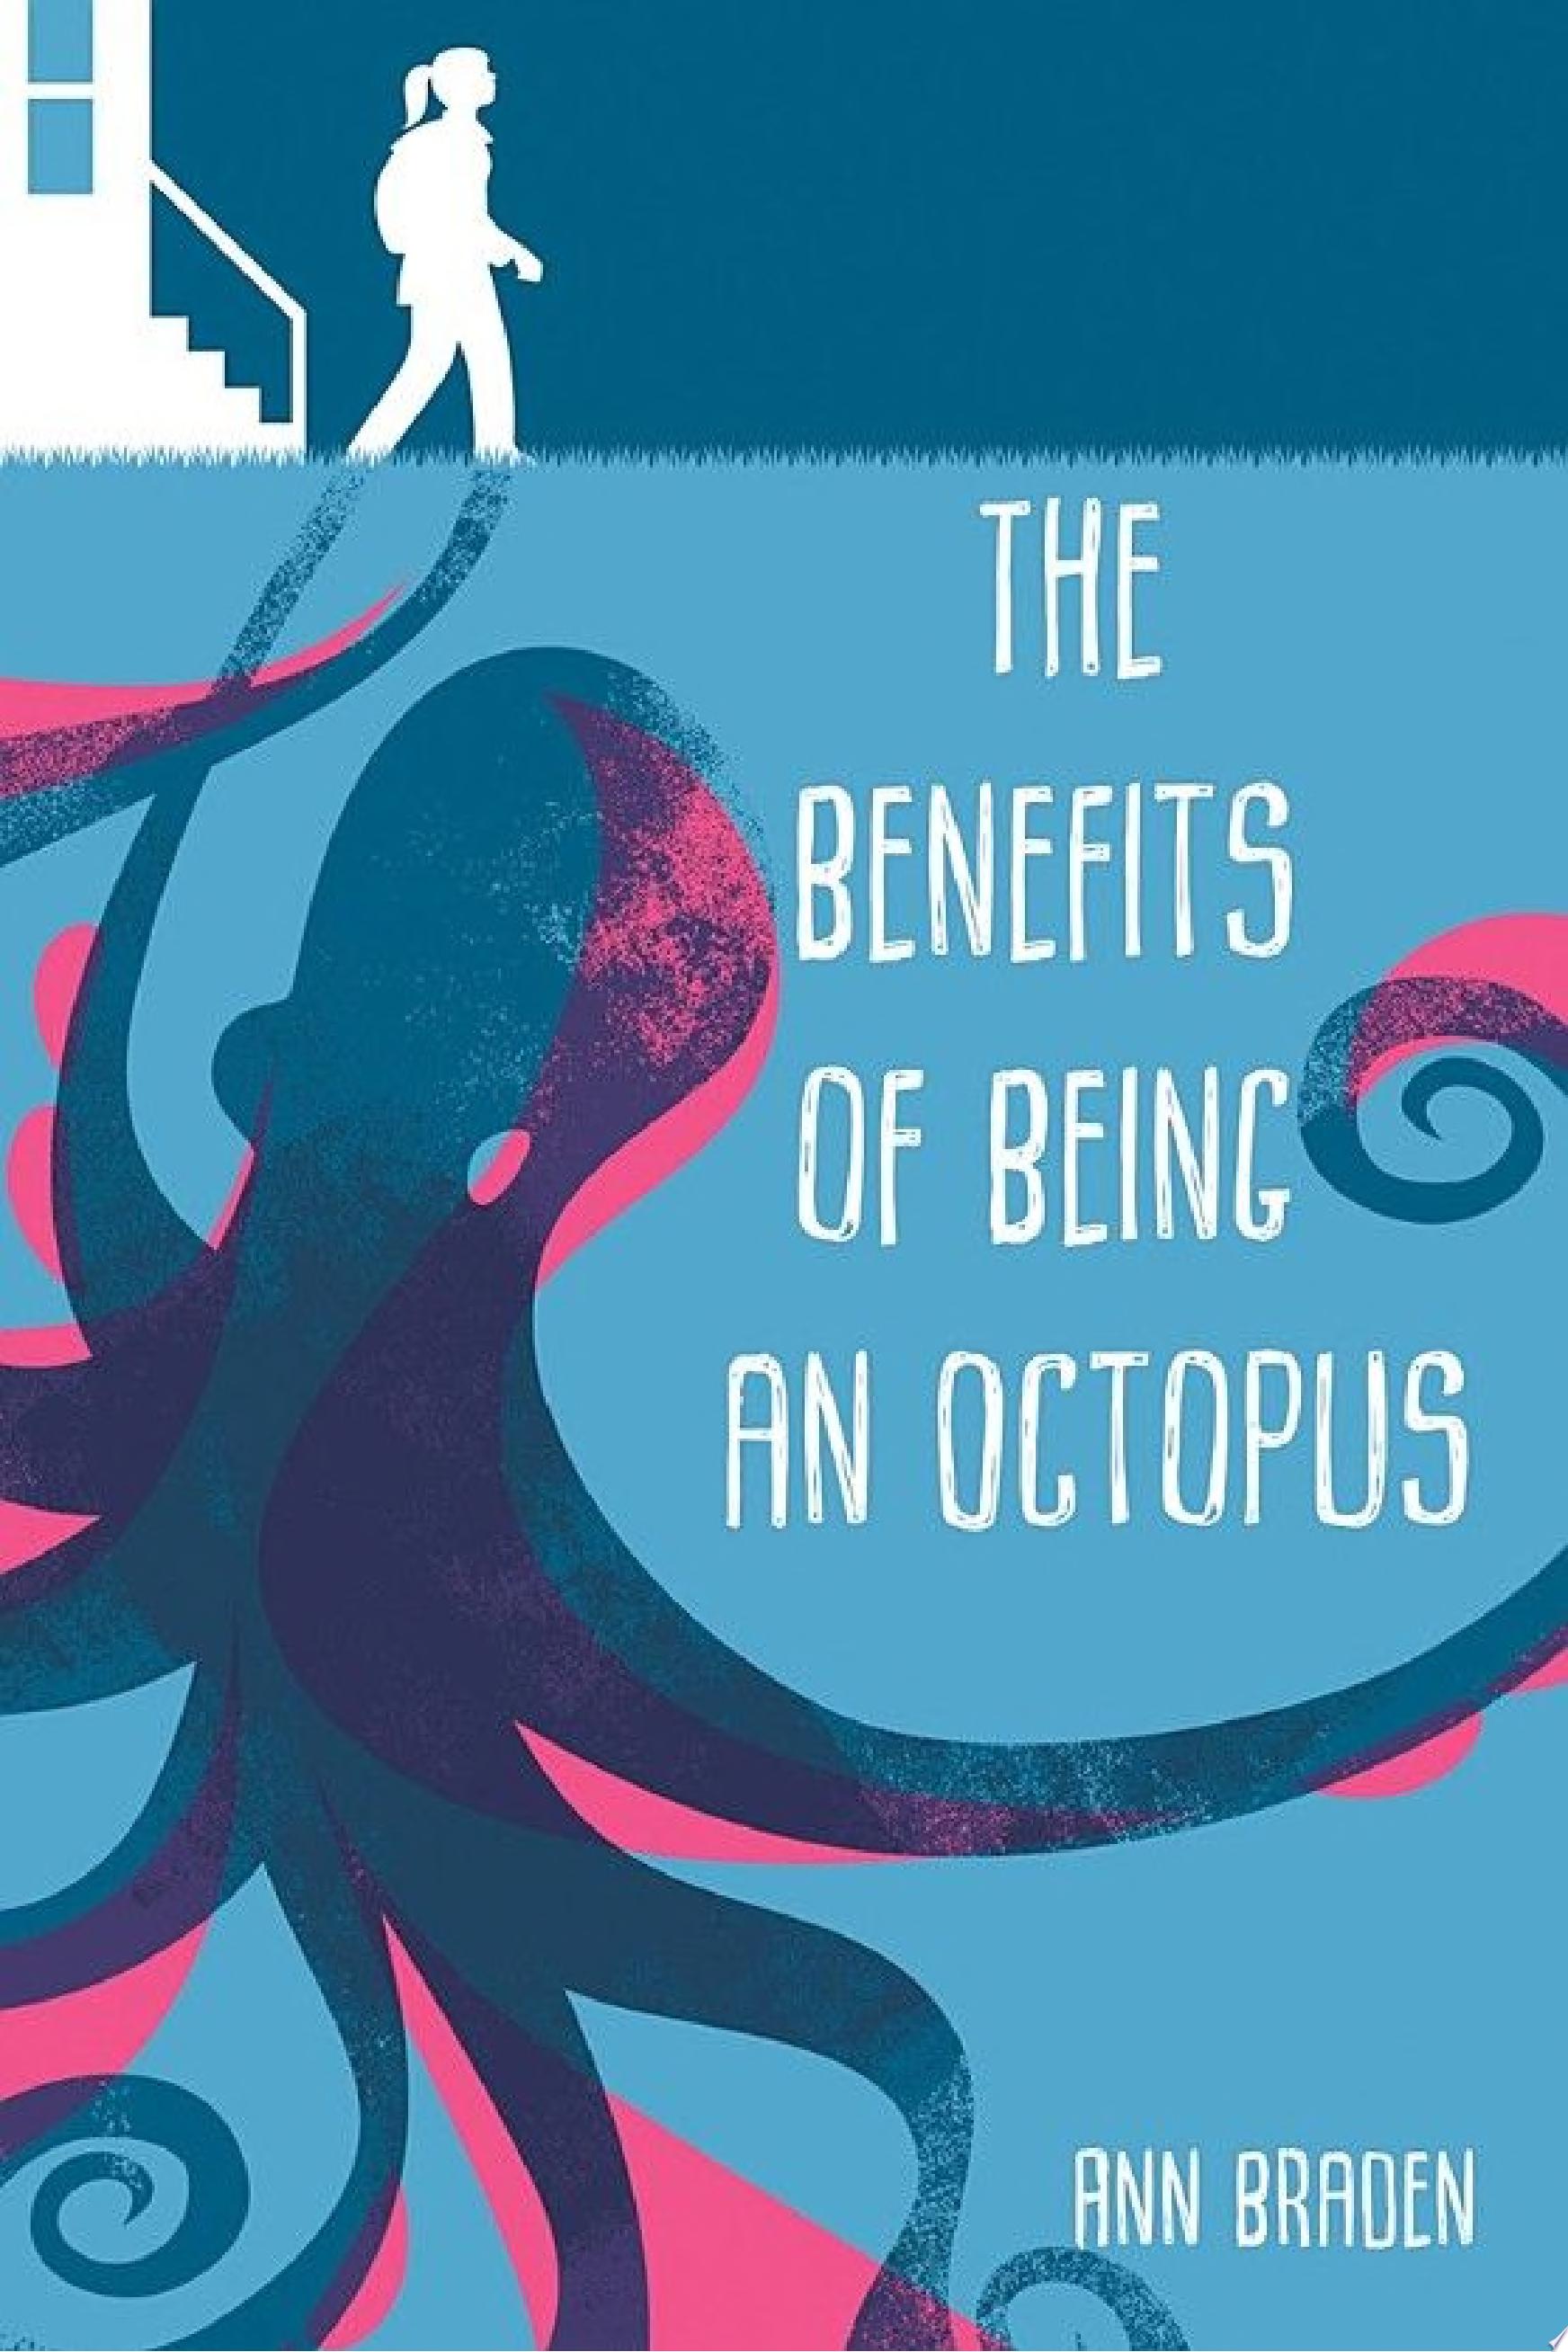 Image for "The Benefits of Being an Octopus"